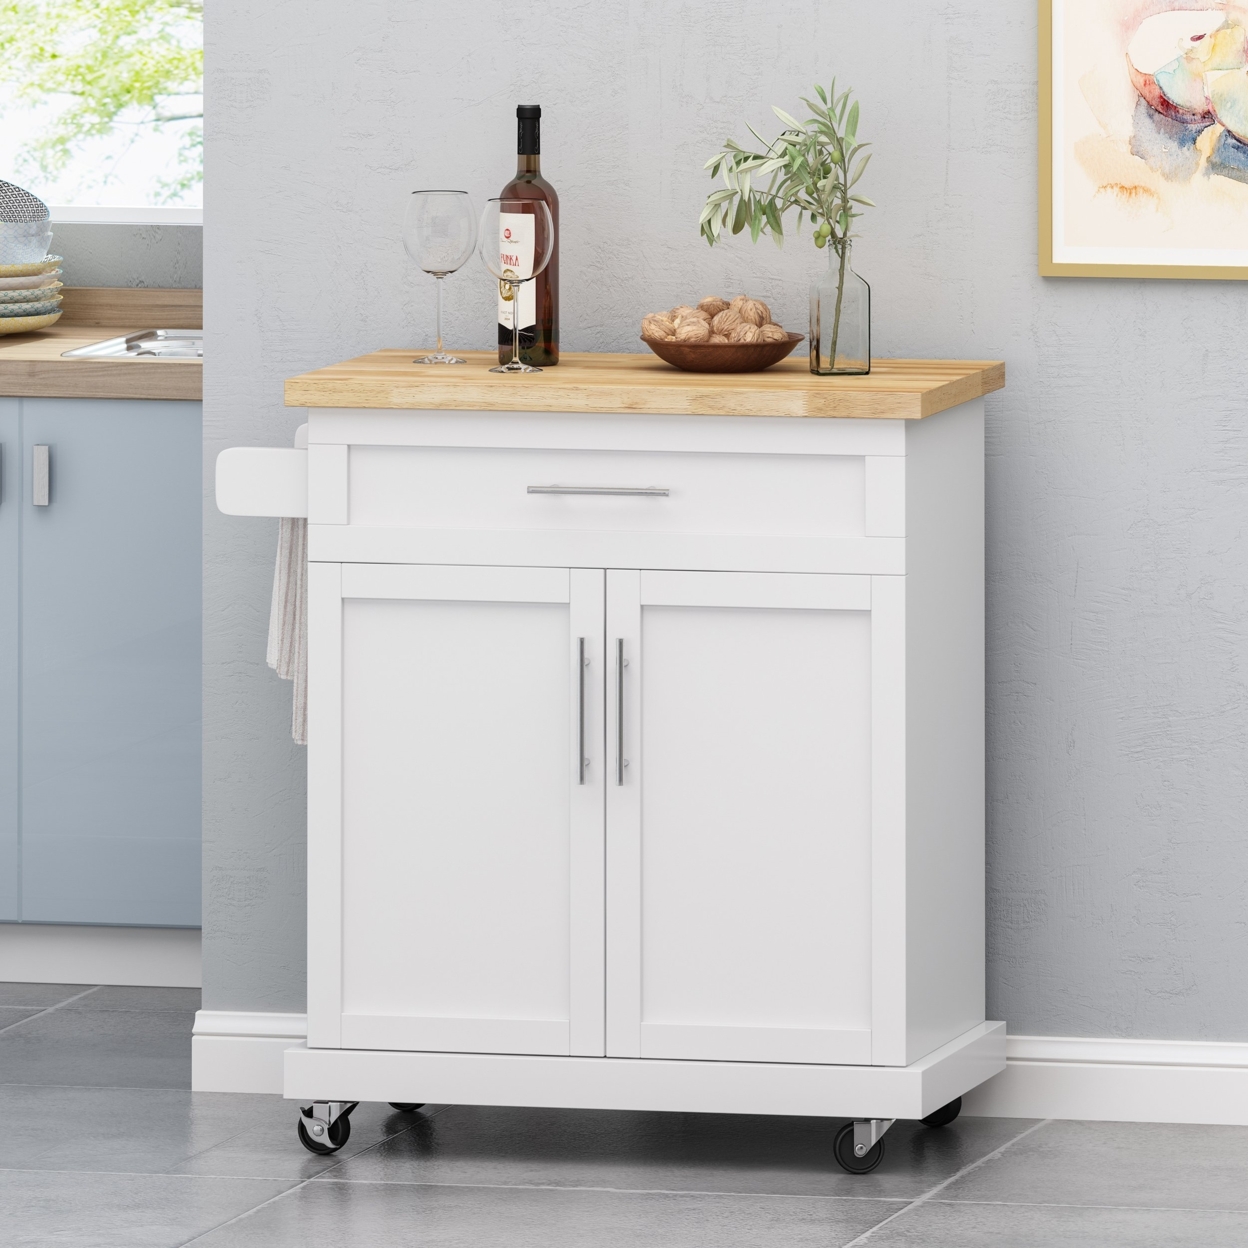 Negley Contemporary Kitchen Cart With Wheels - White/natural